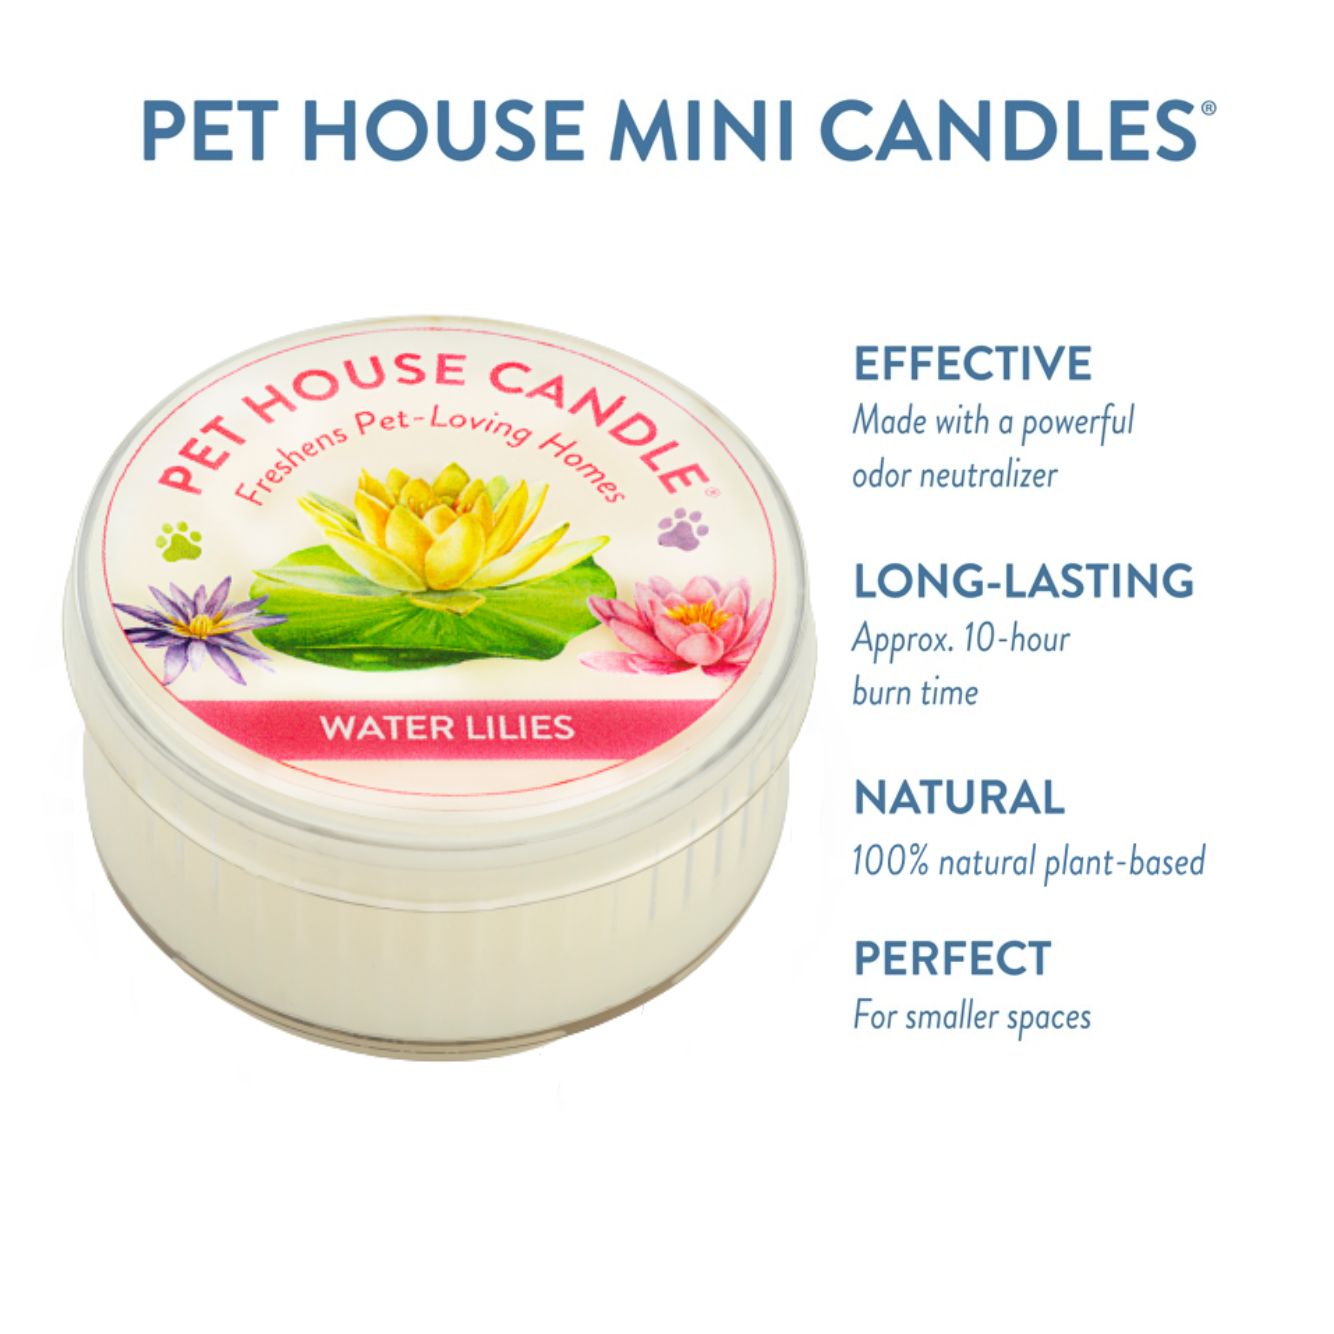 Water Lilies Mini Candle infographics